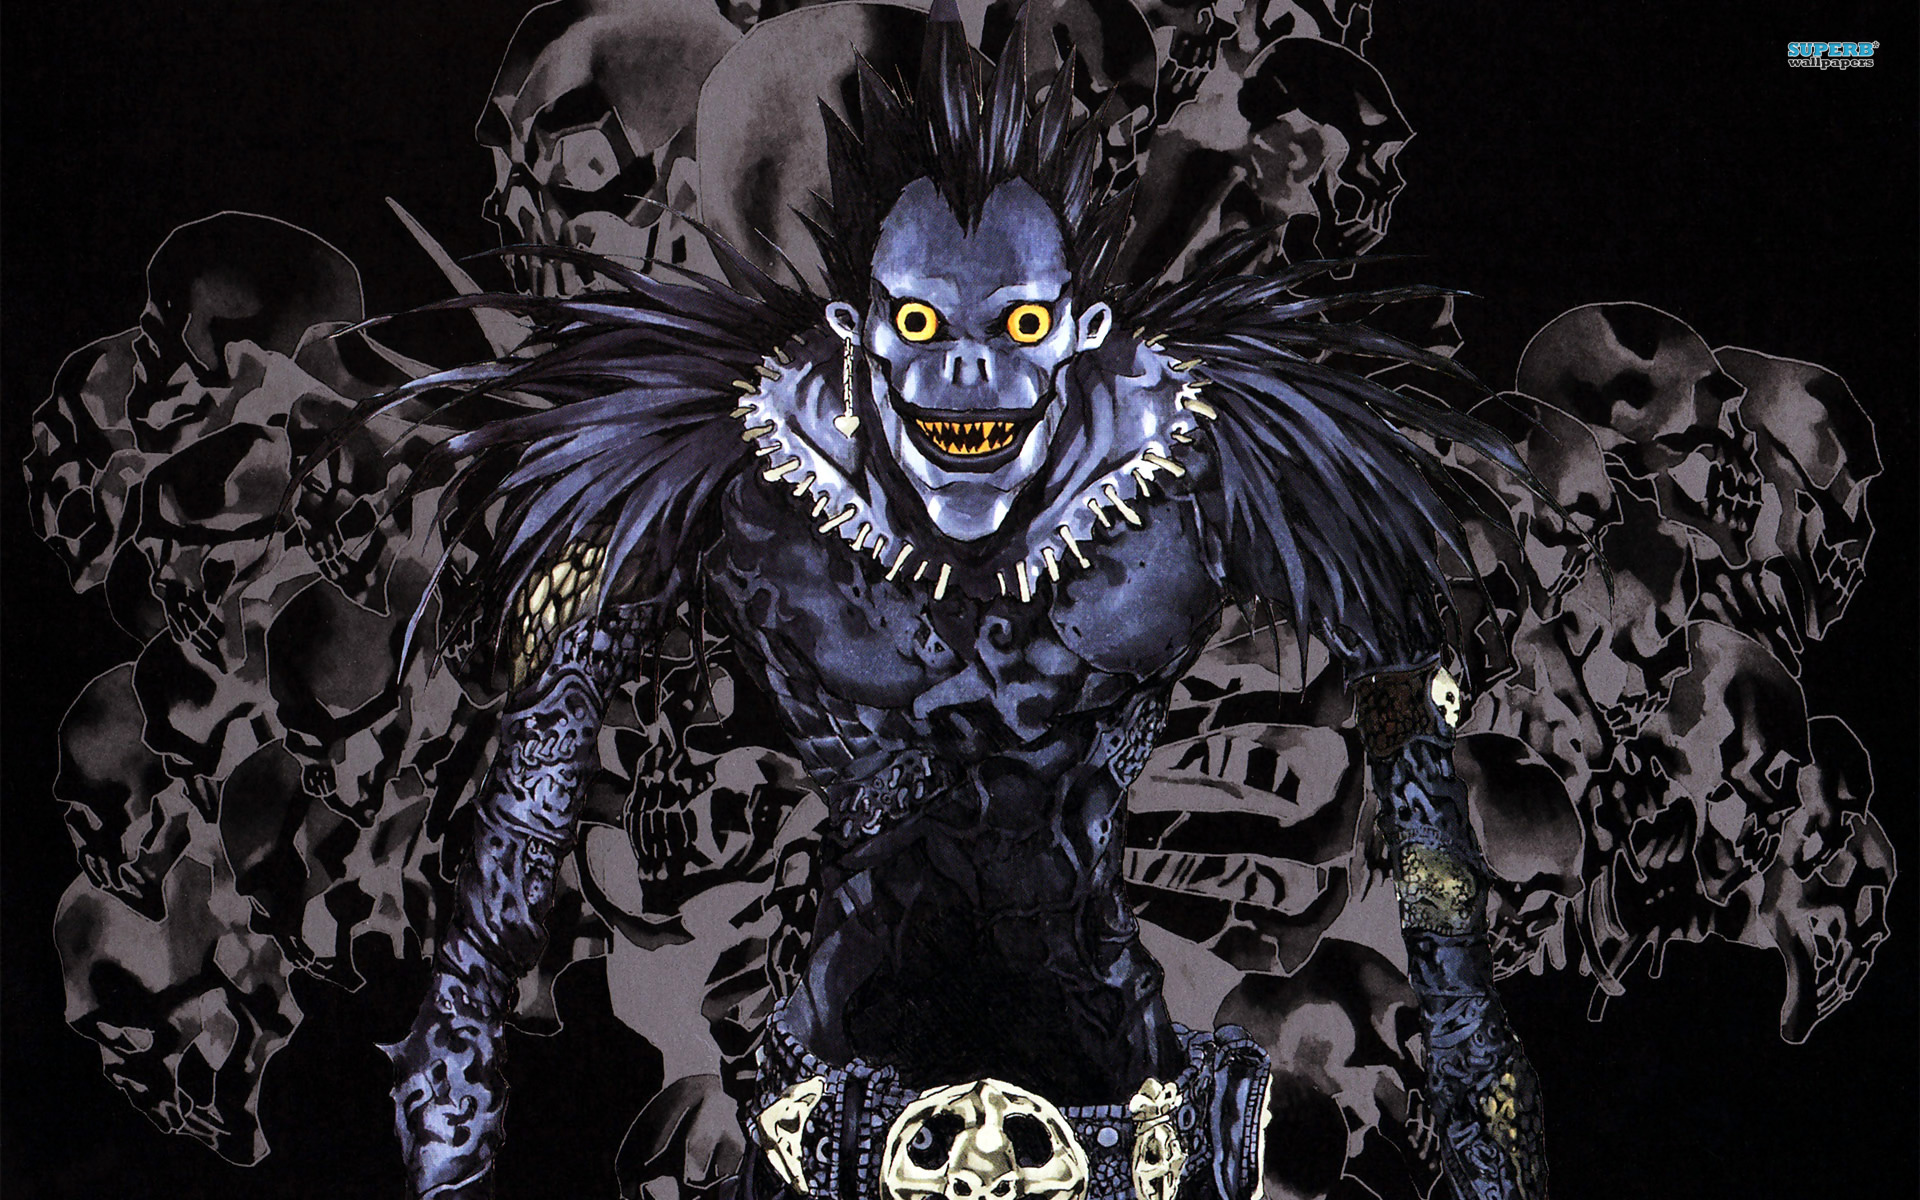 Death Note Ryuk Wallpapers